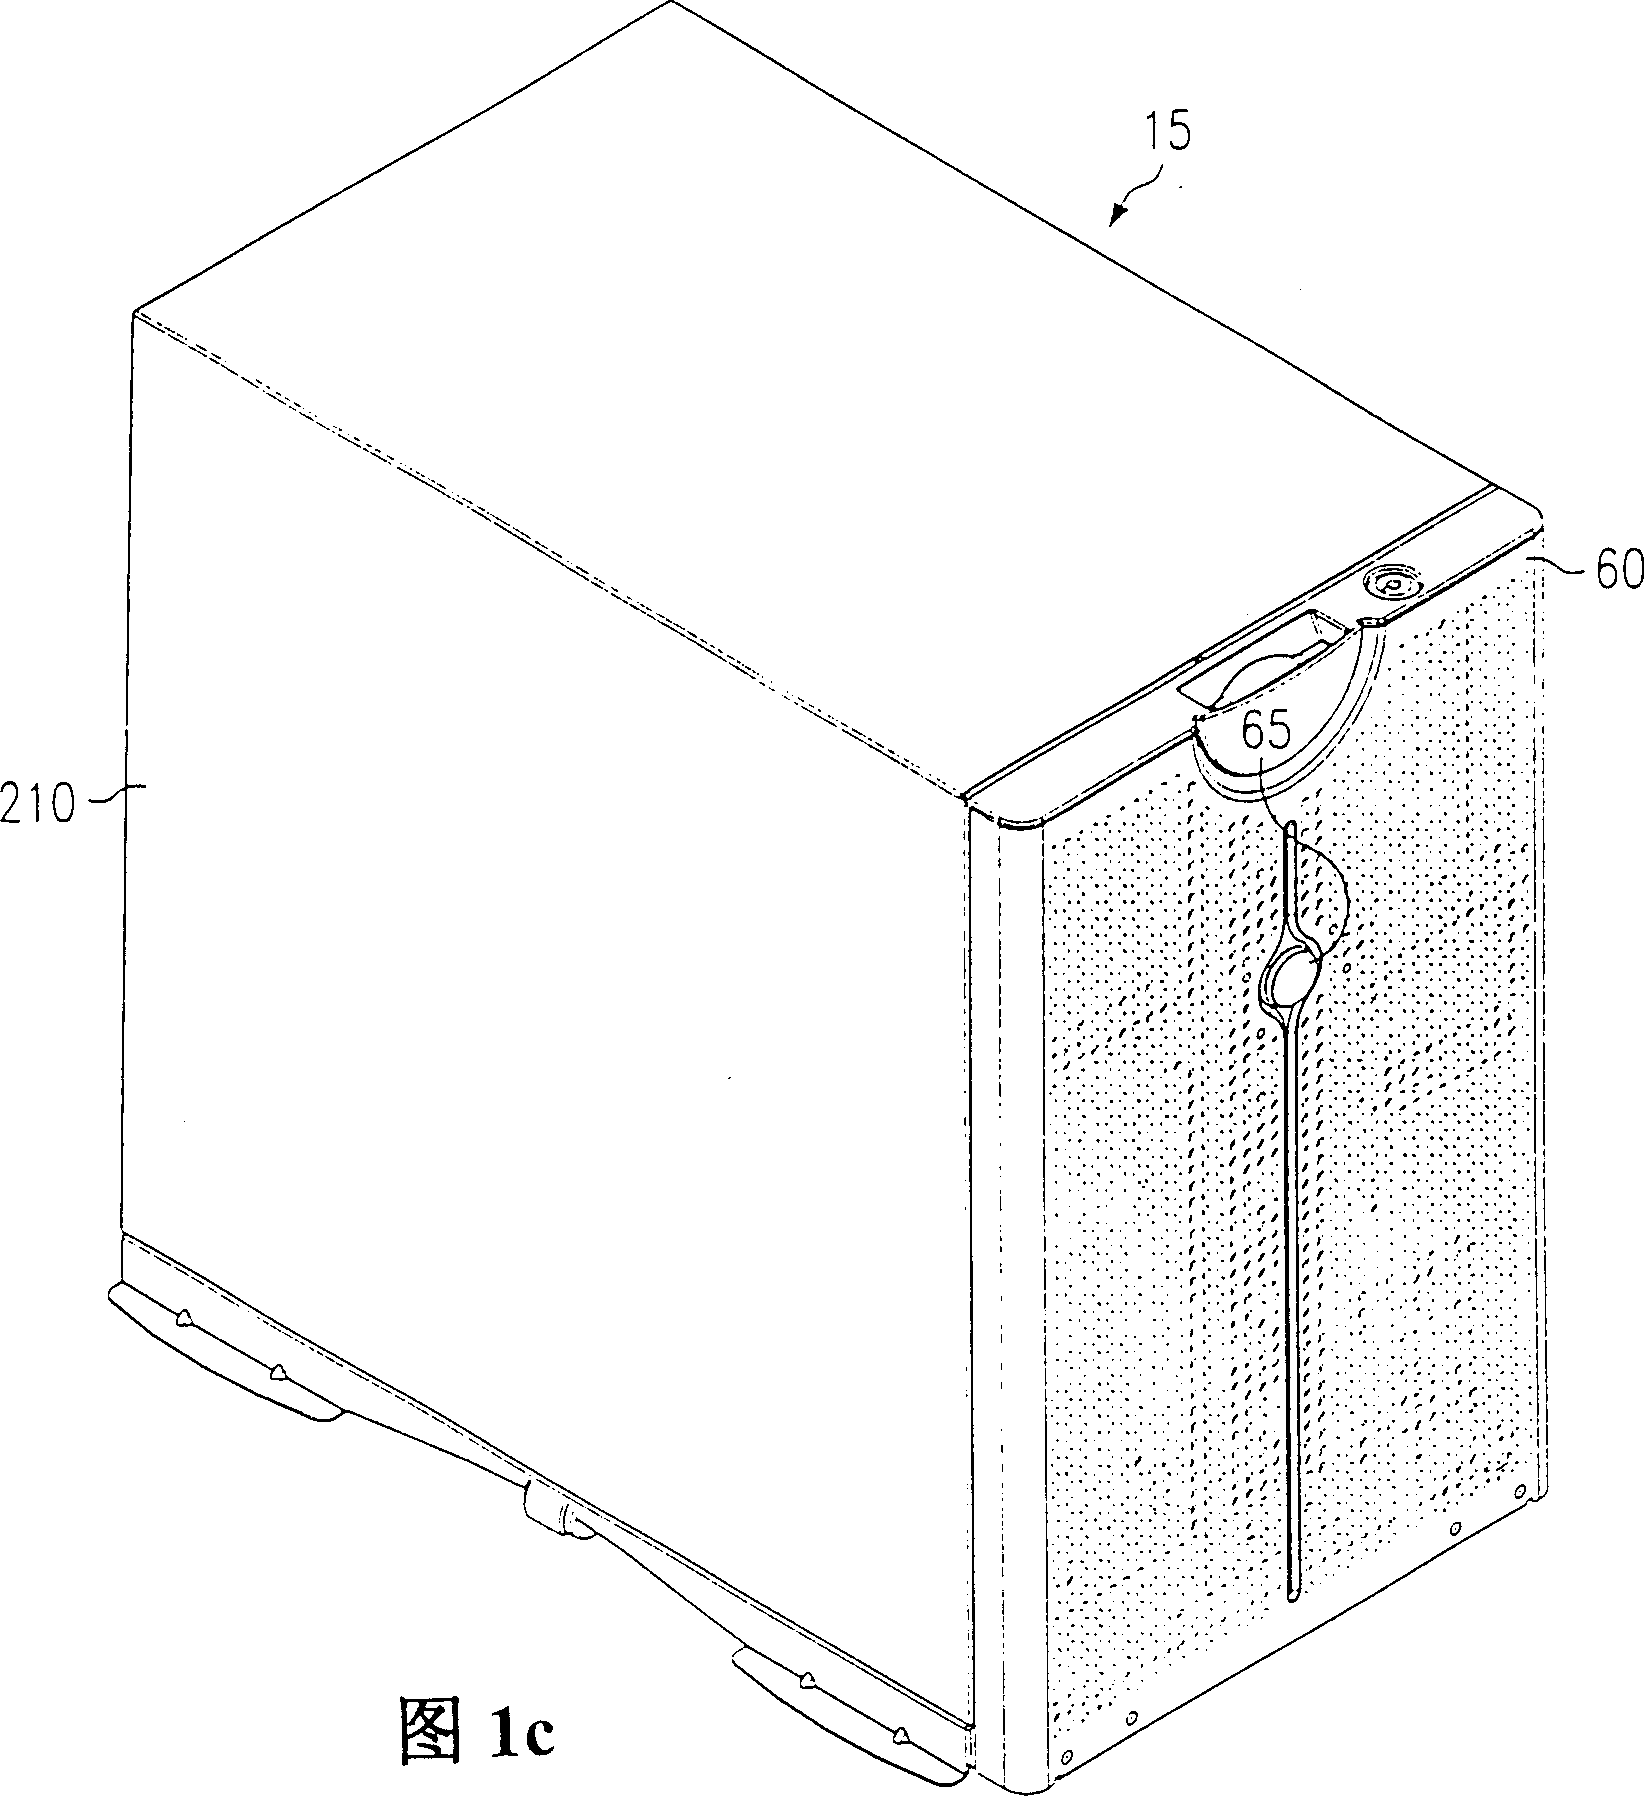 System and method for displaying computer system state information